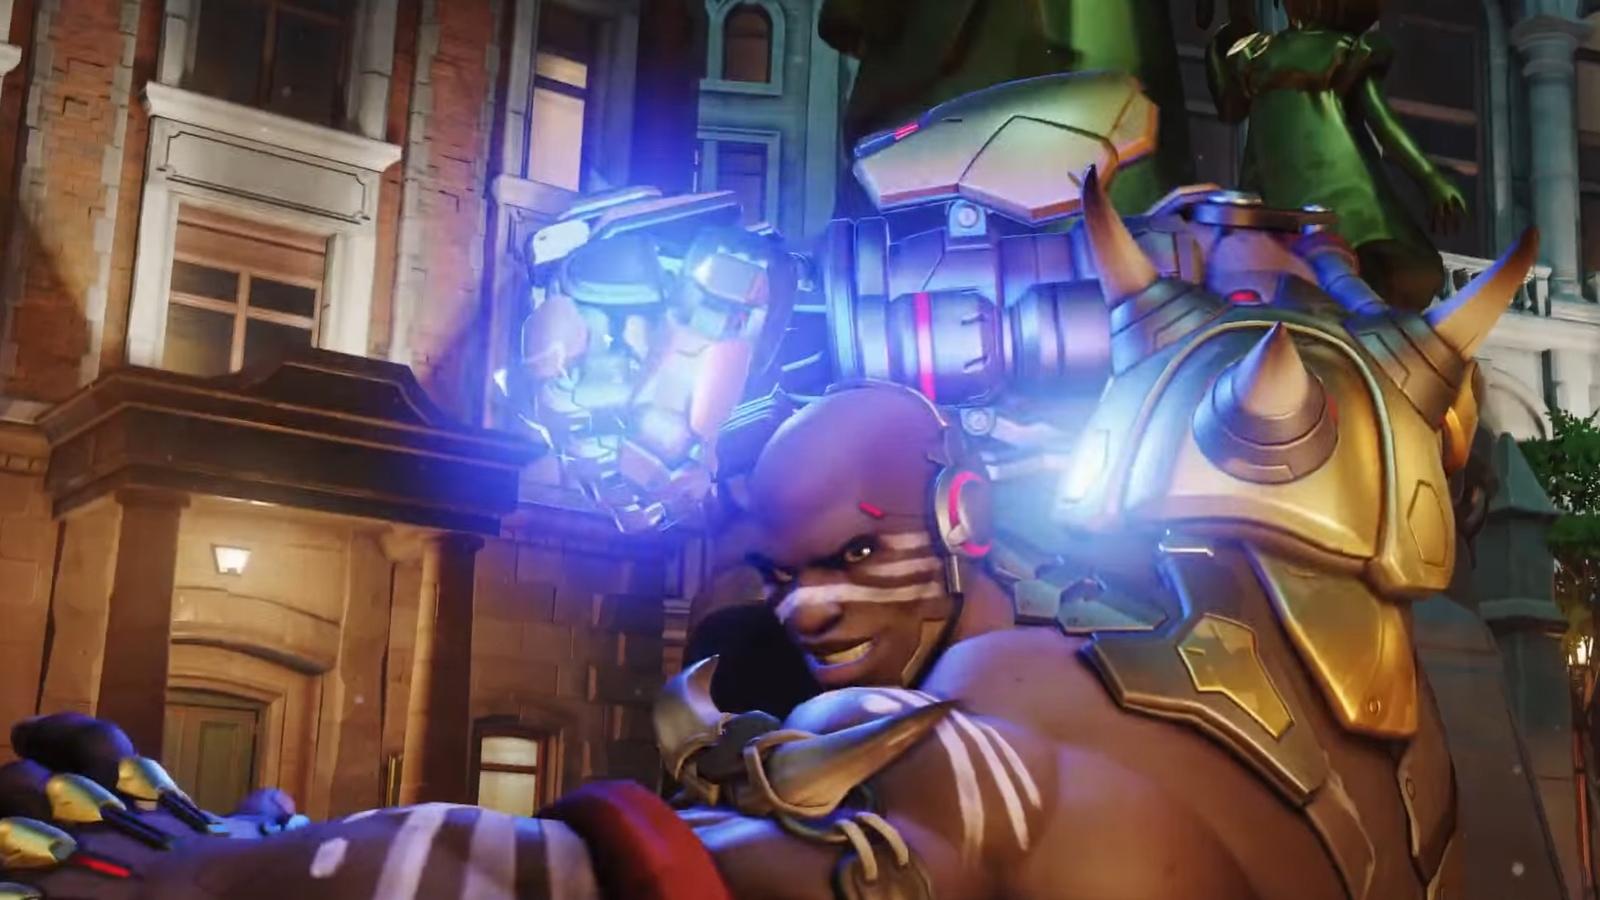 Doomfist charging up Rocket Punch ability as seen in Overwatch 2 trailer.